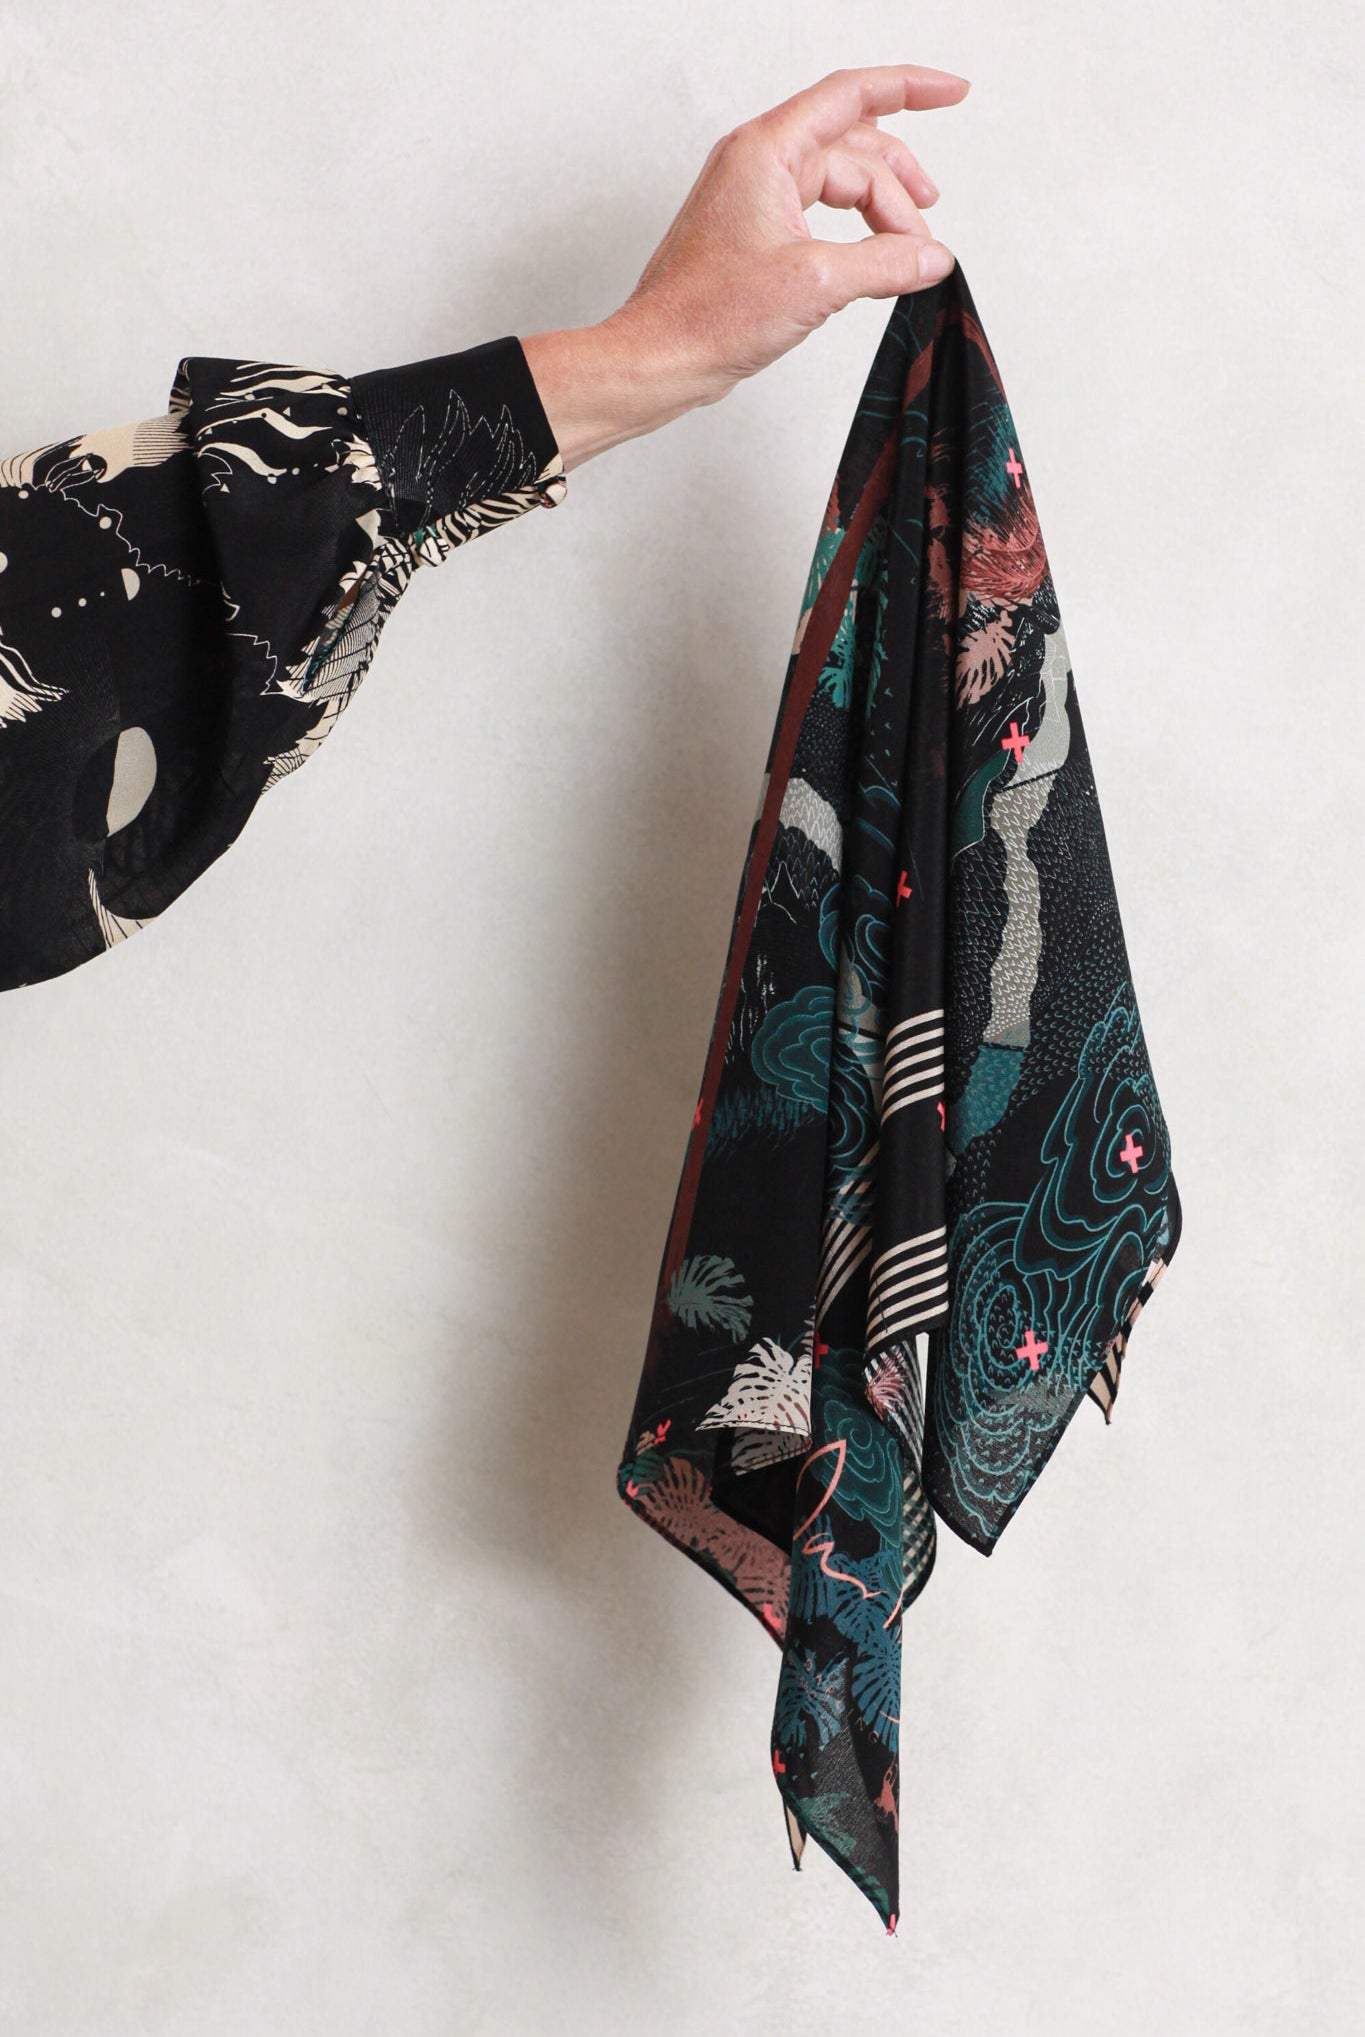 A silk scarf being held against a white wall. It has a tropical design in blacks, greens and pinks